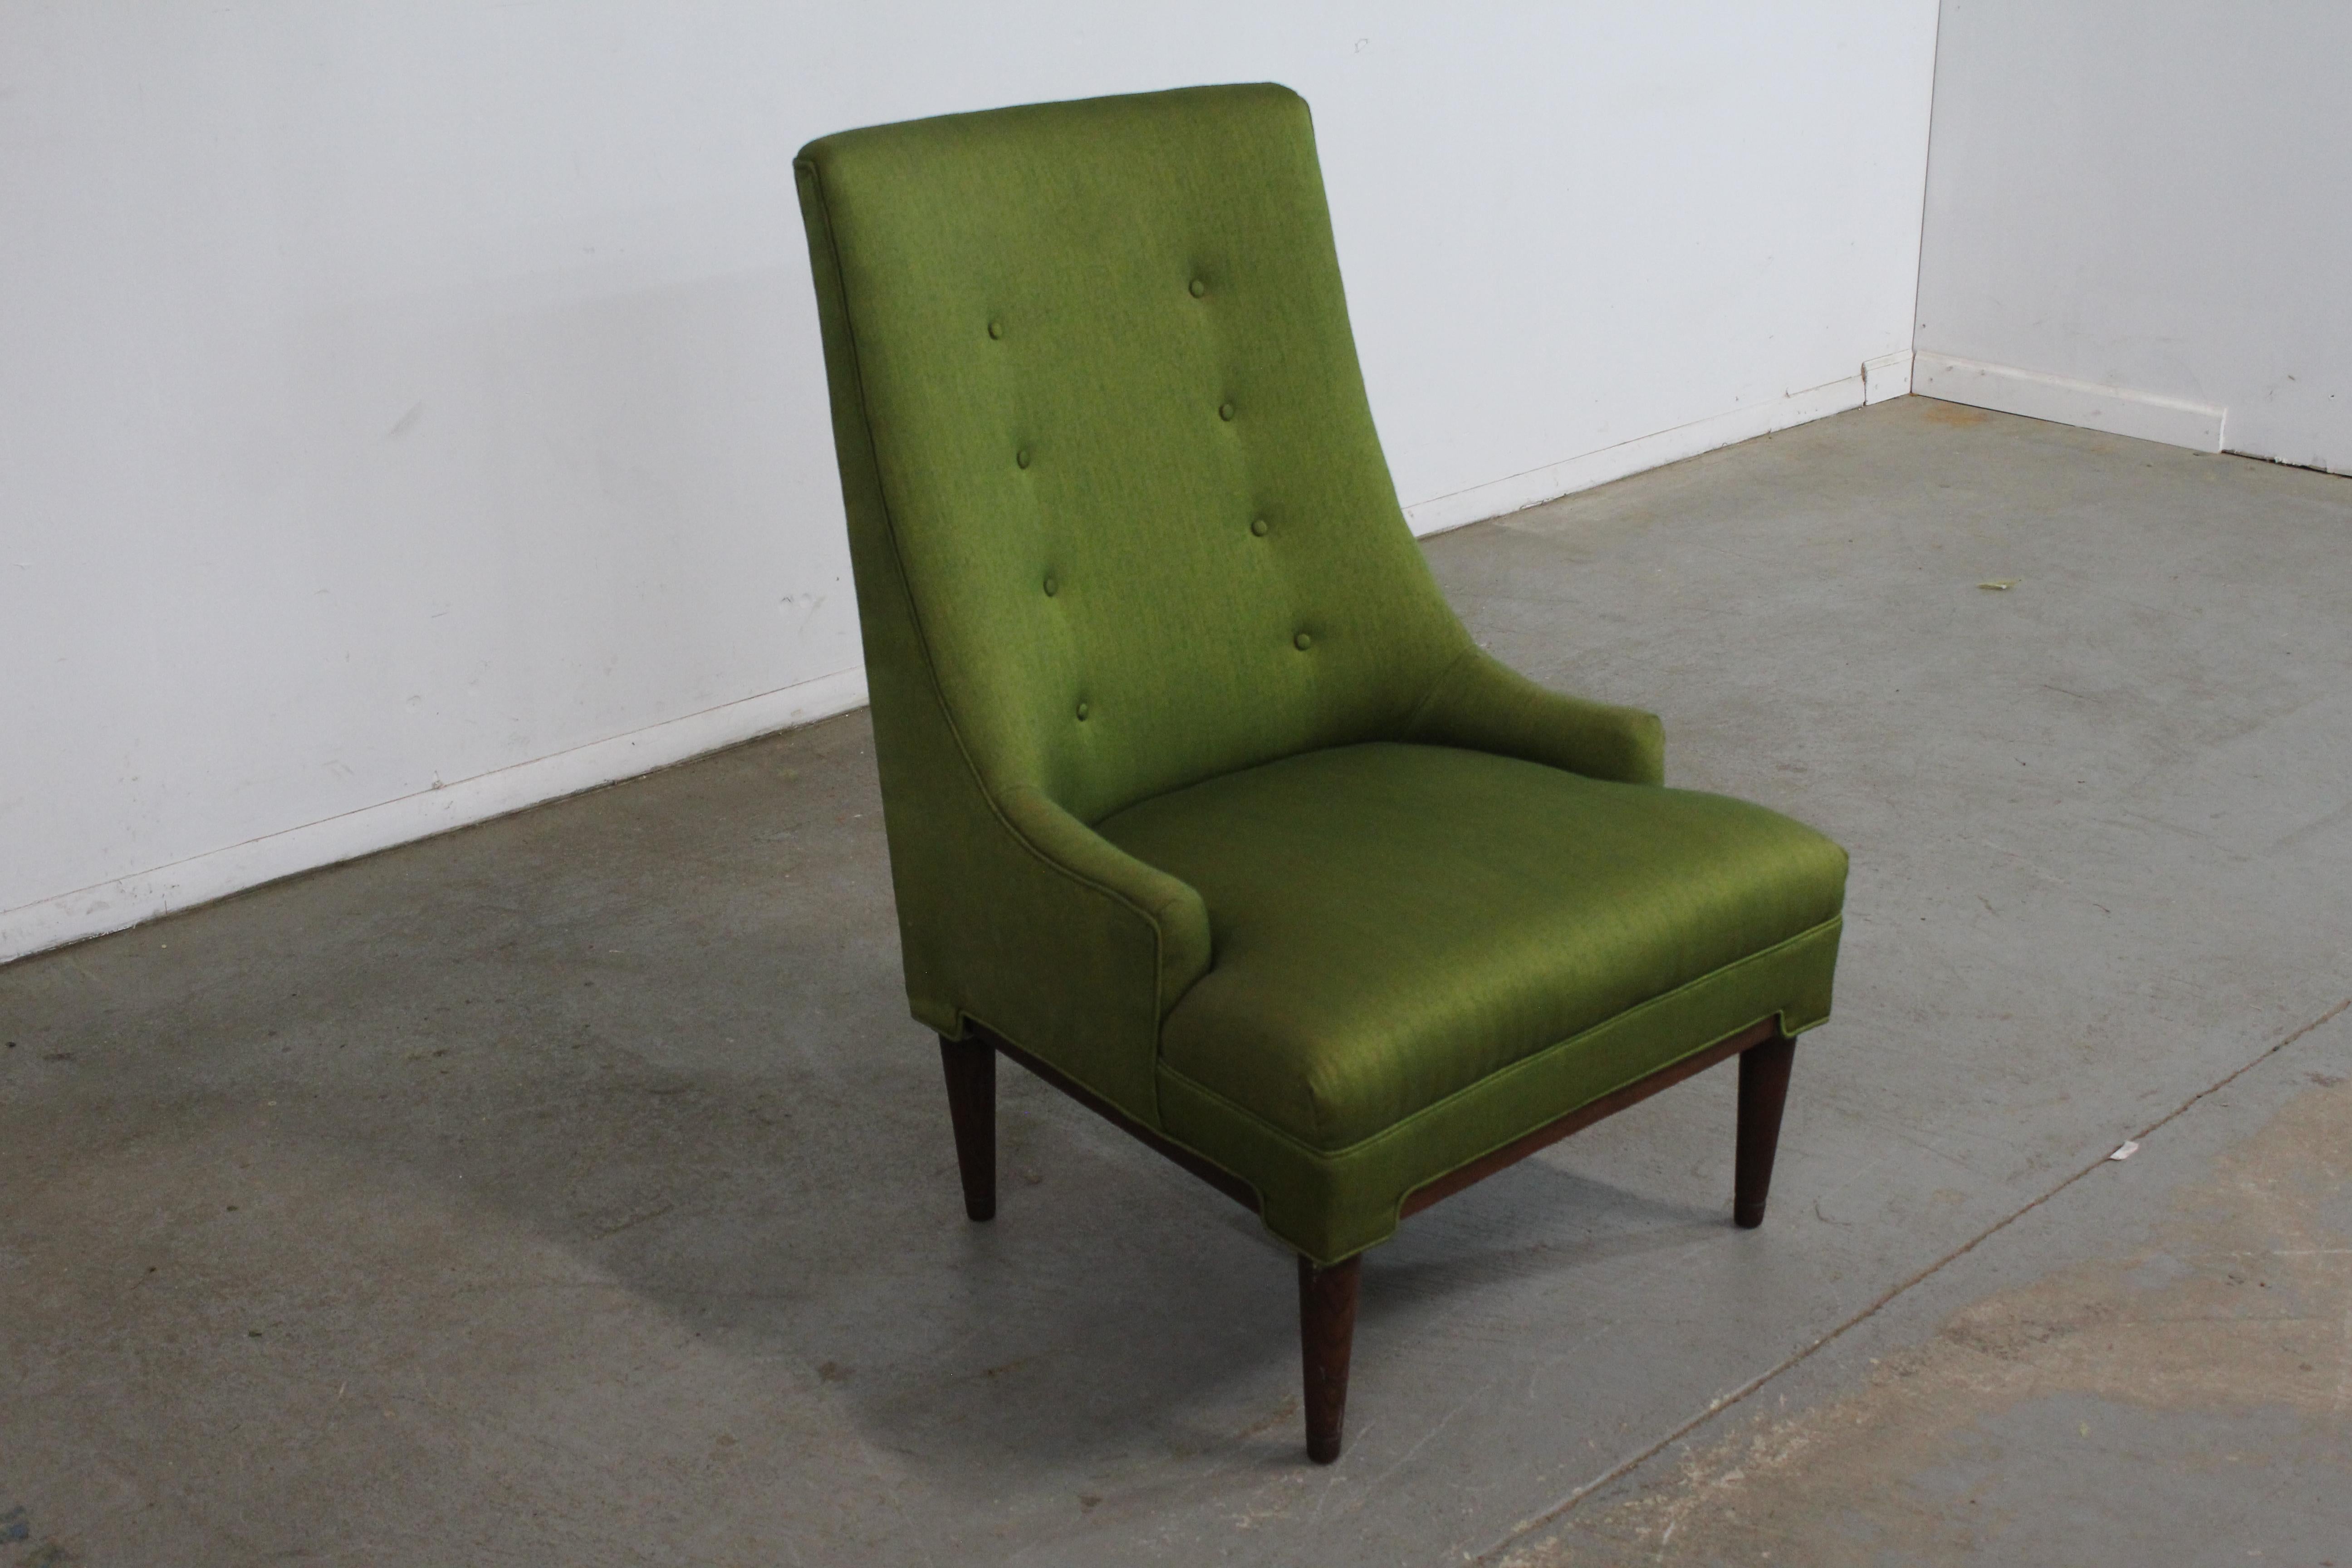 North American Vintage Mid-Century Modern Low Profile Arm/Accent Chair For Sale